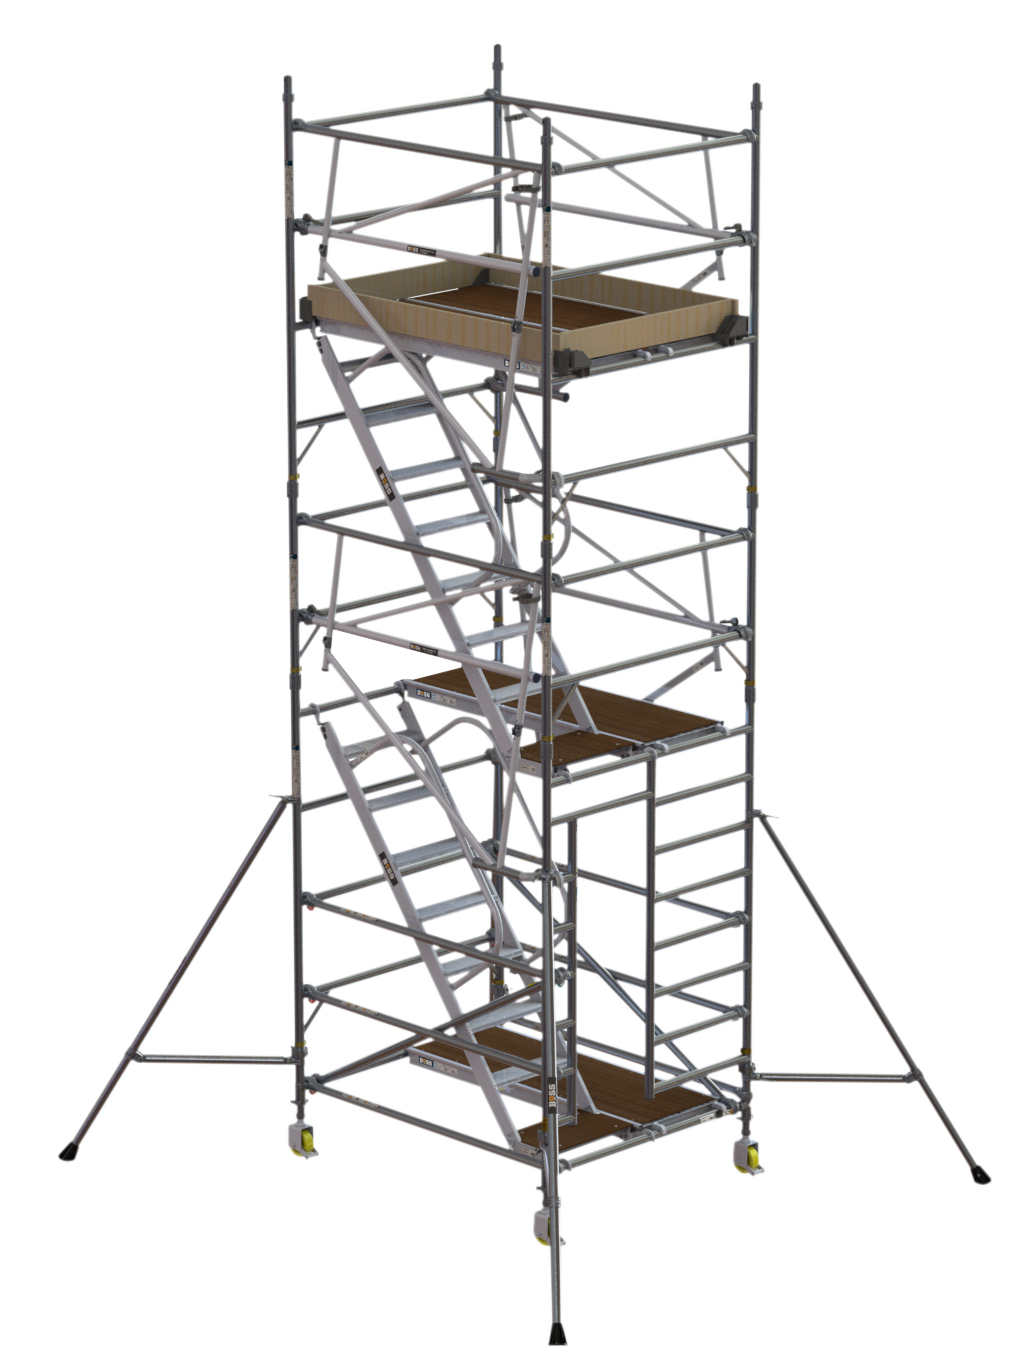 BoSS Staircase Aluminium Access Tower - double width tower